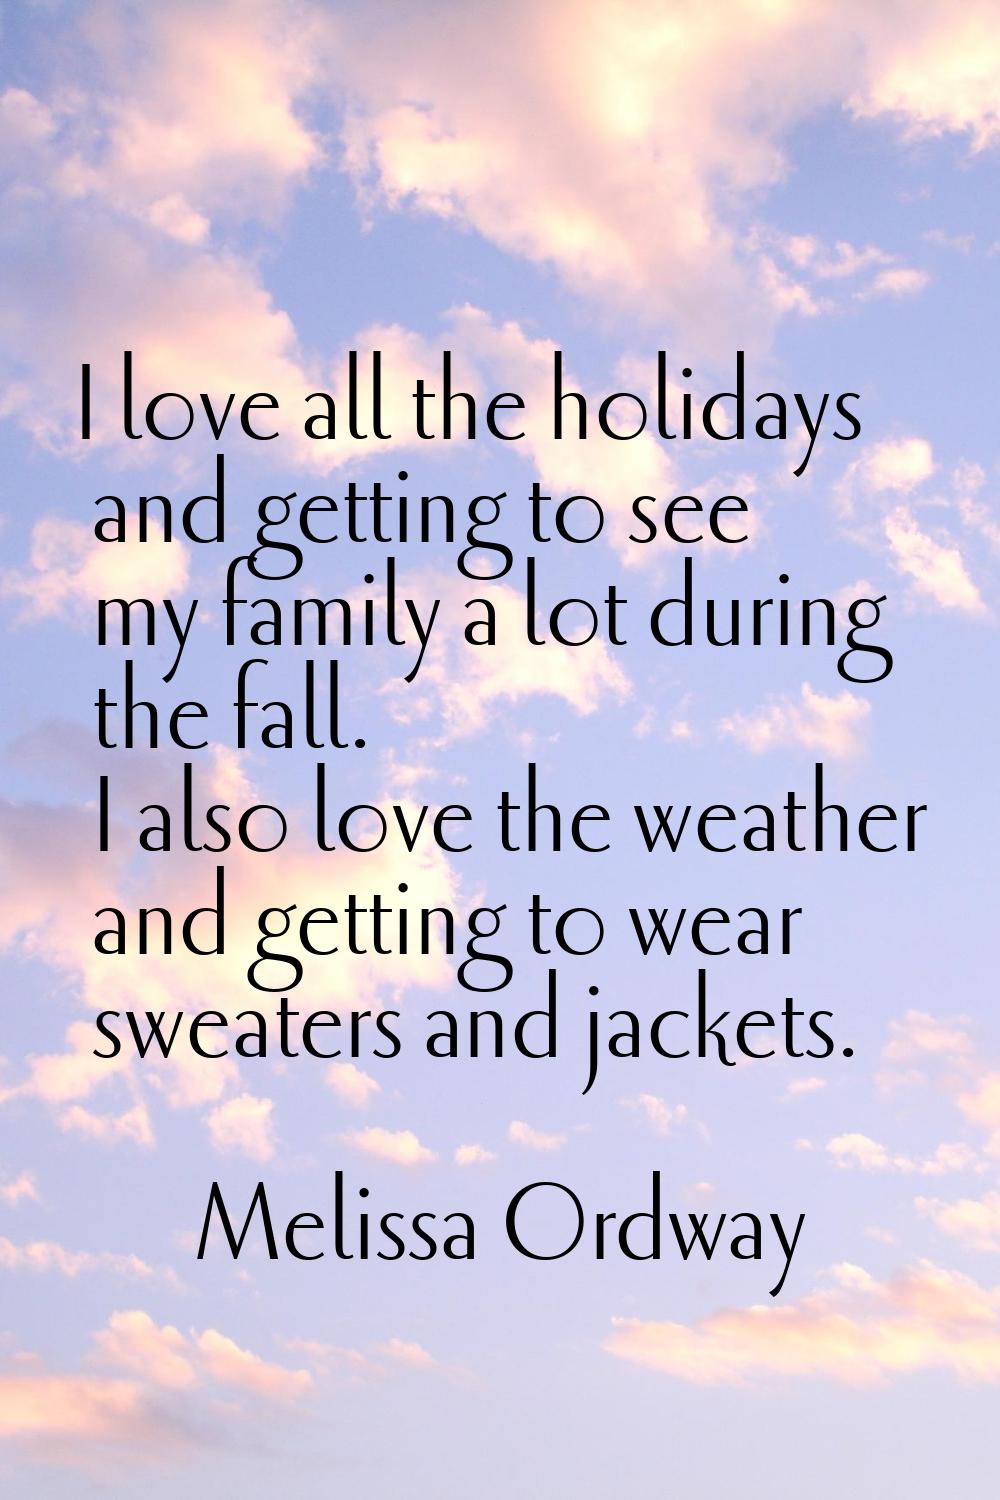 I love all the holidays and getting to see my family a lot during the fall. I also love the weather